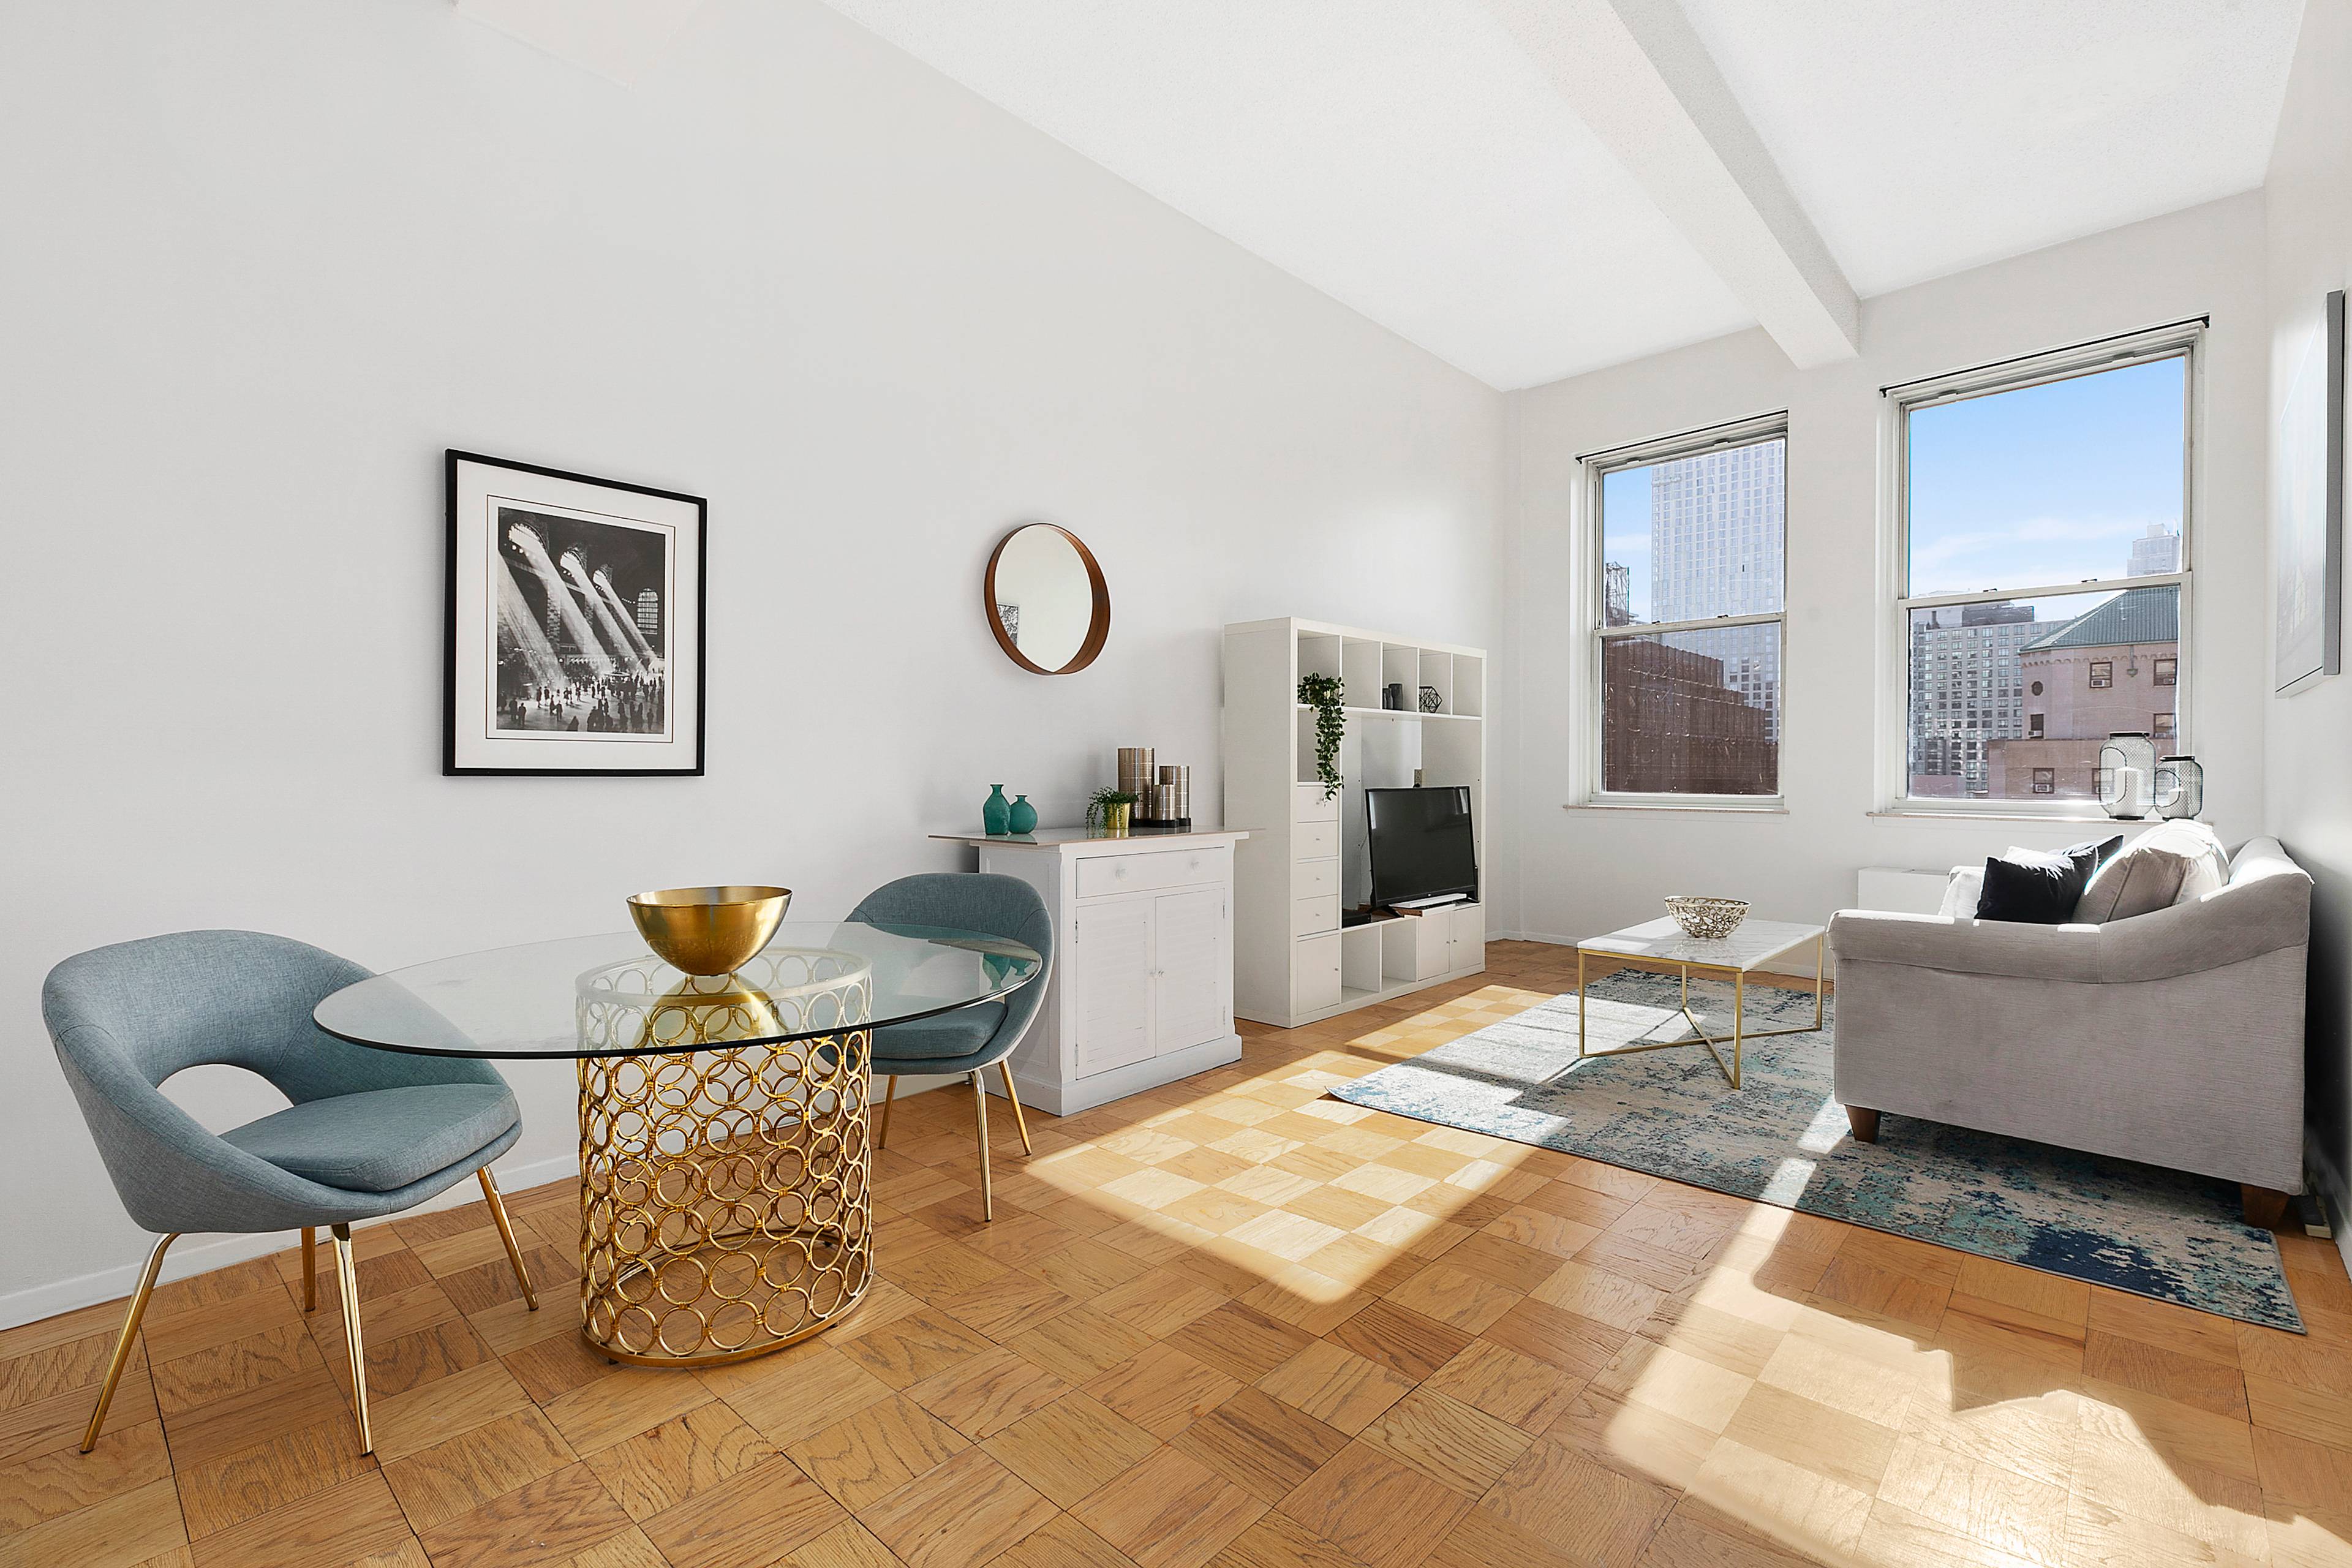 Hello light and sky ! True loft living on the border of Brooklyn Heights and Downtown Brooklyn, this turnkey extra large 1BR apartment with soaring 12' ceilings, eastern open exposures, ...